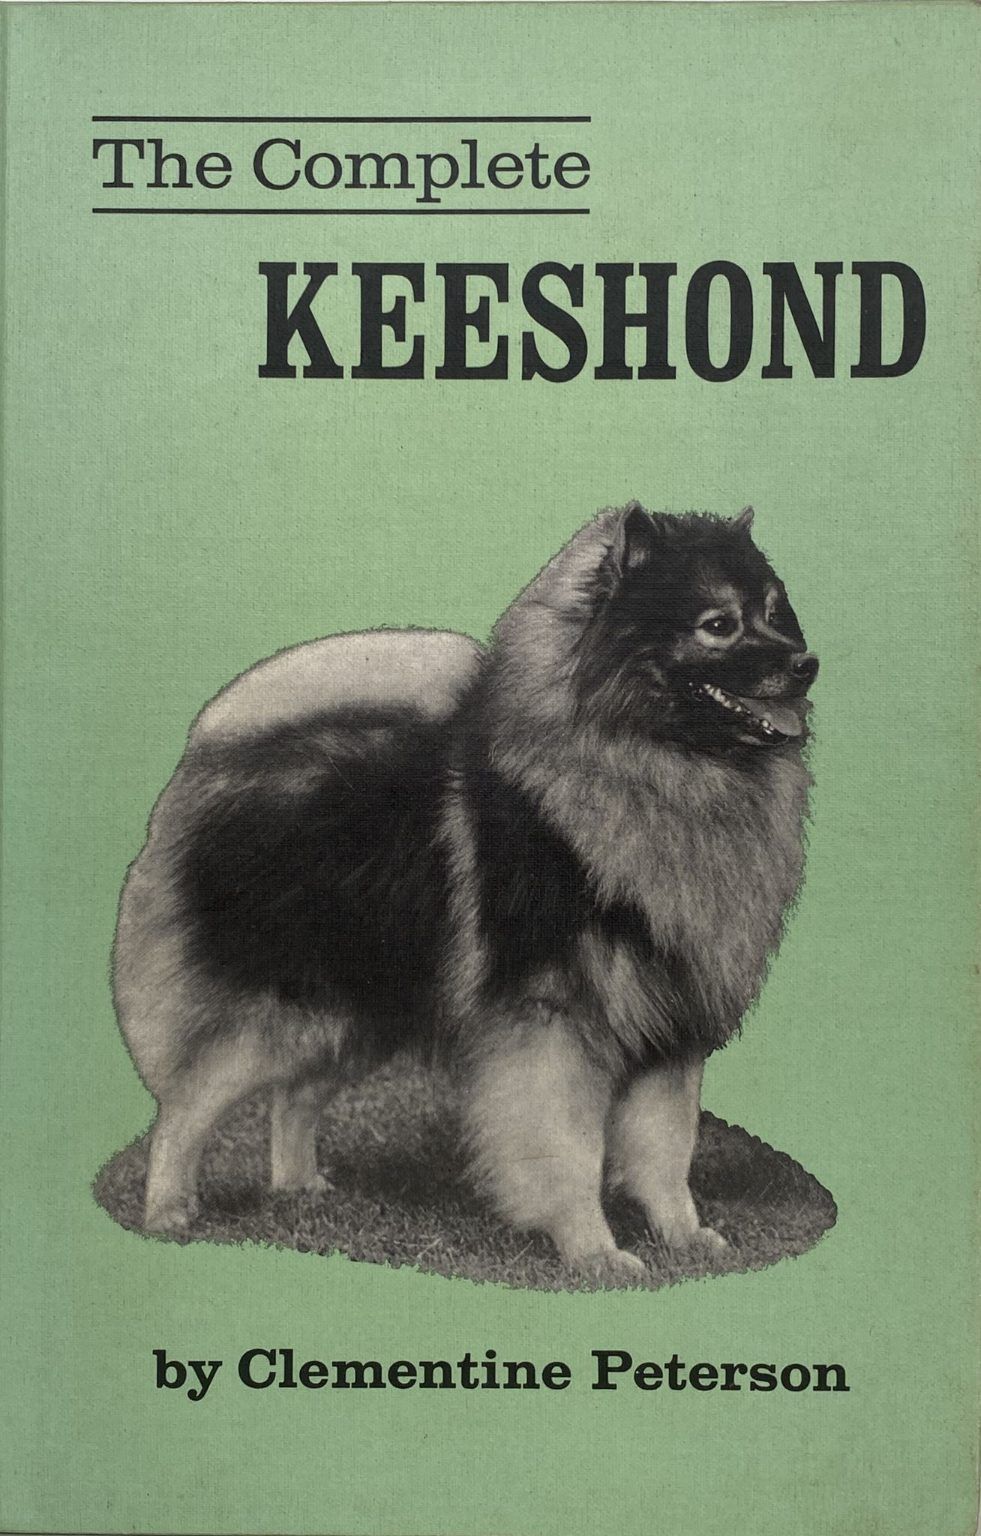 THE COMPLETE KEESHOND